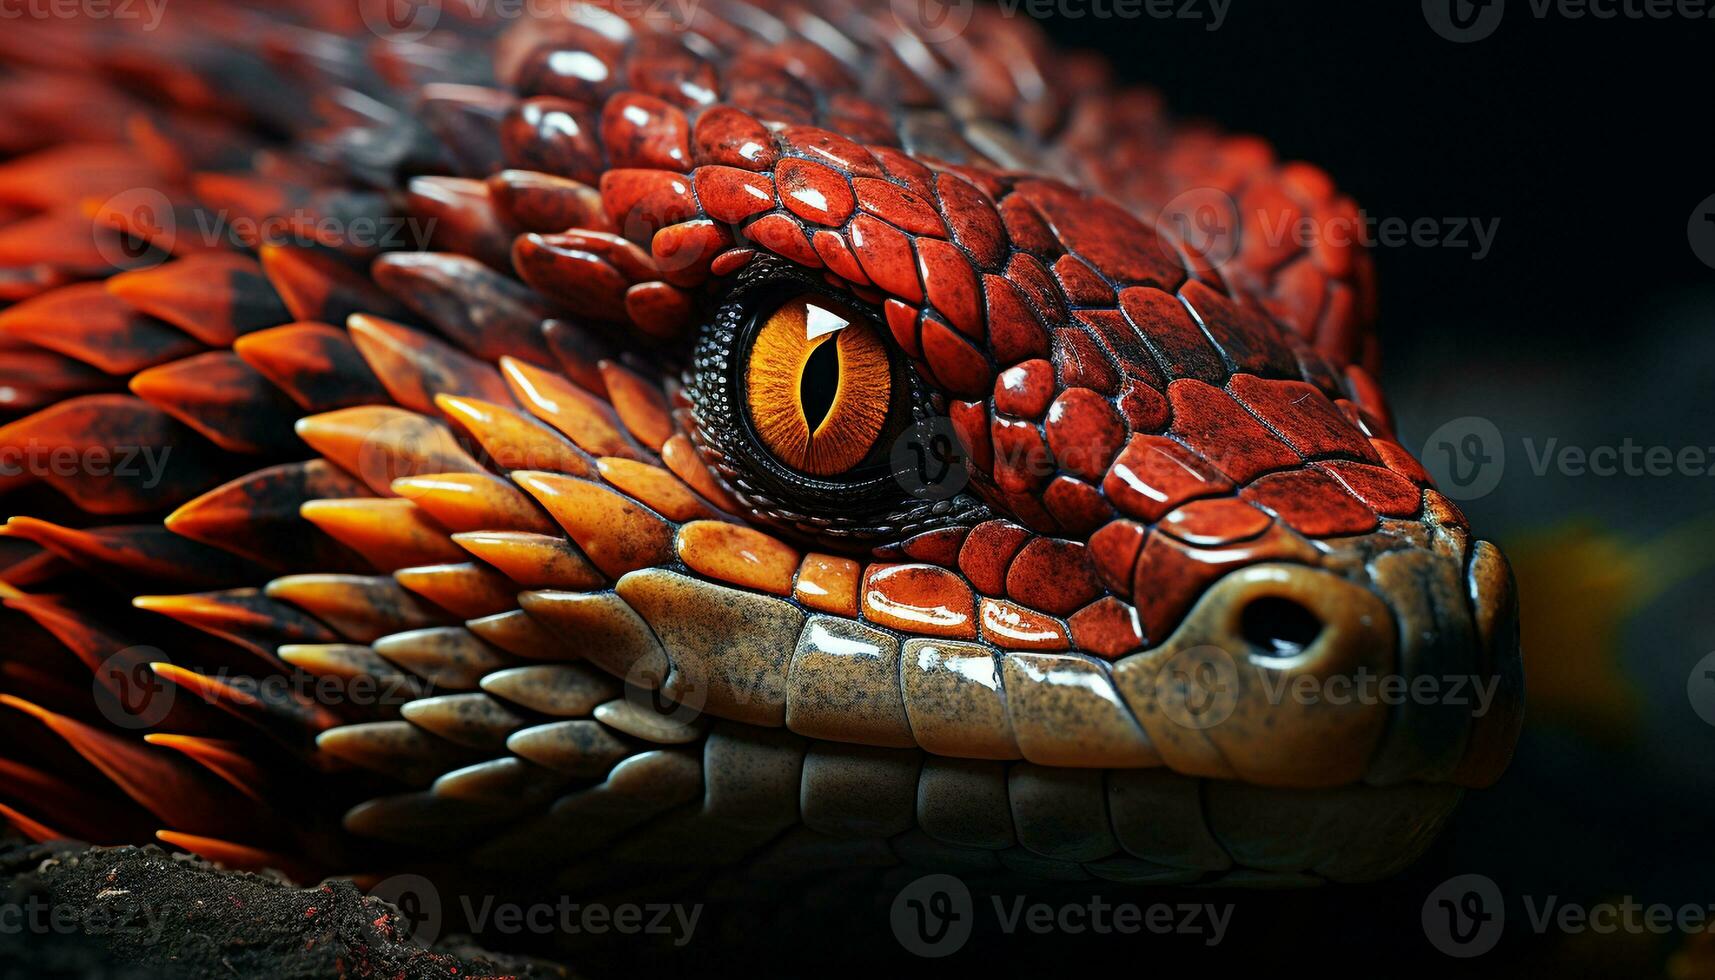 https://static.vecteezy.com/system/resources/previews/027/906/832/non_2x/spooky-viper-dangerous-reptile-looking-with-aggression-selective-focus-generated-by-ai-photo.jpg